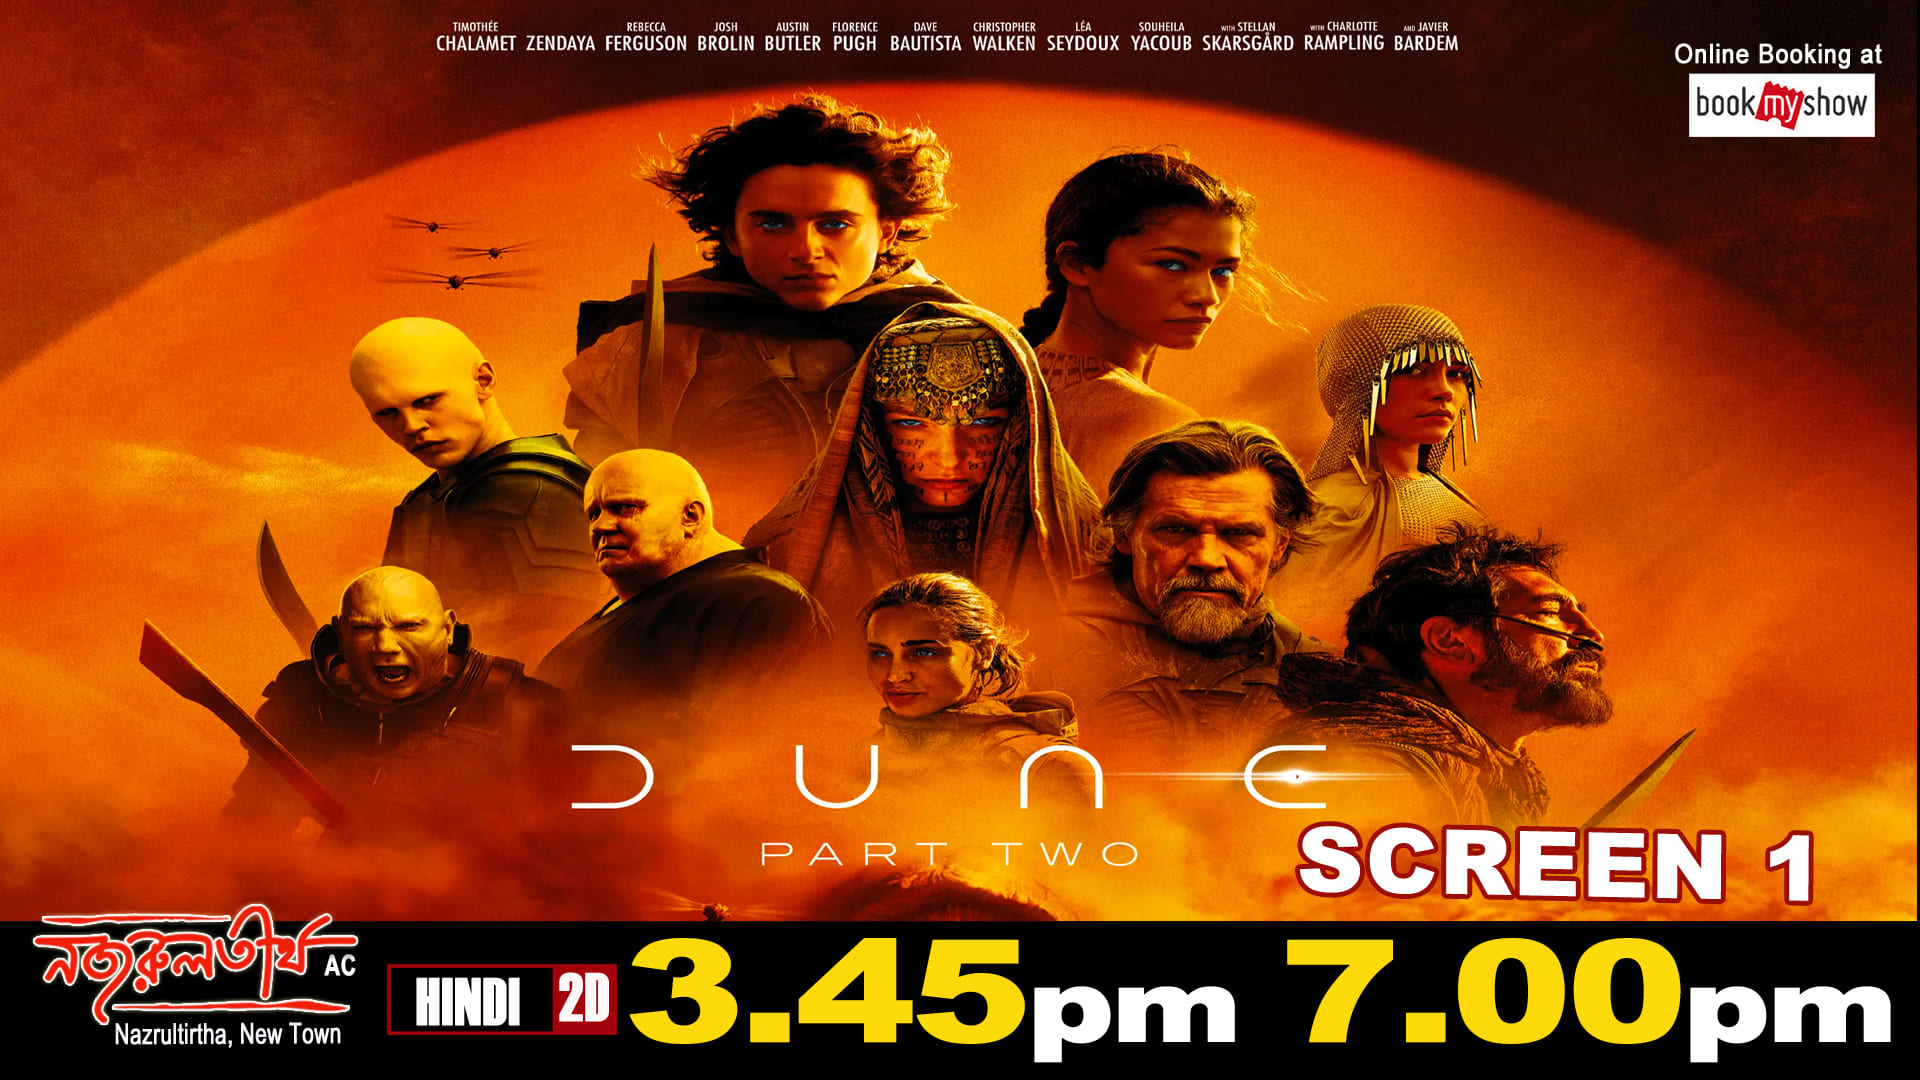 http://nazrultirtha.co.in/upload_file/upcoming_events/DUNE Part 2 (2D Hindi) 